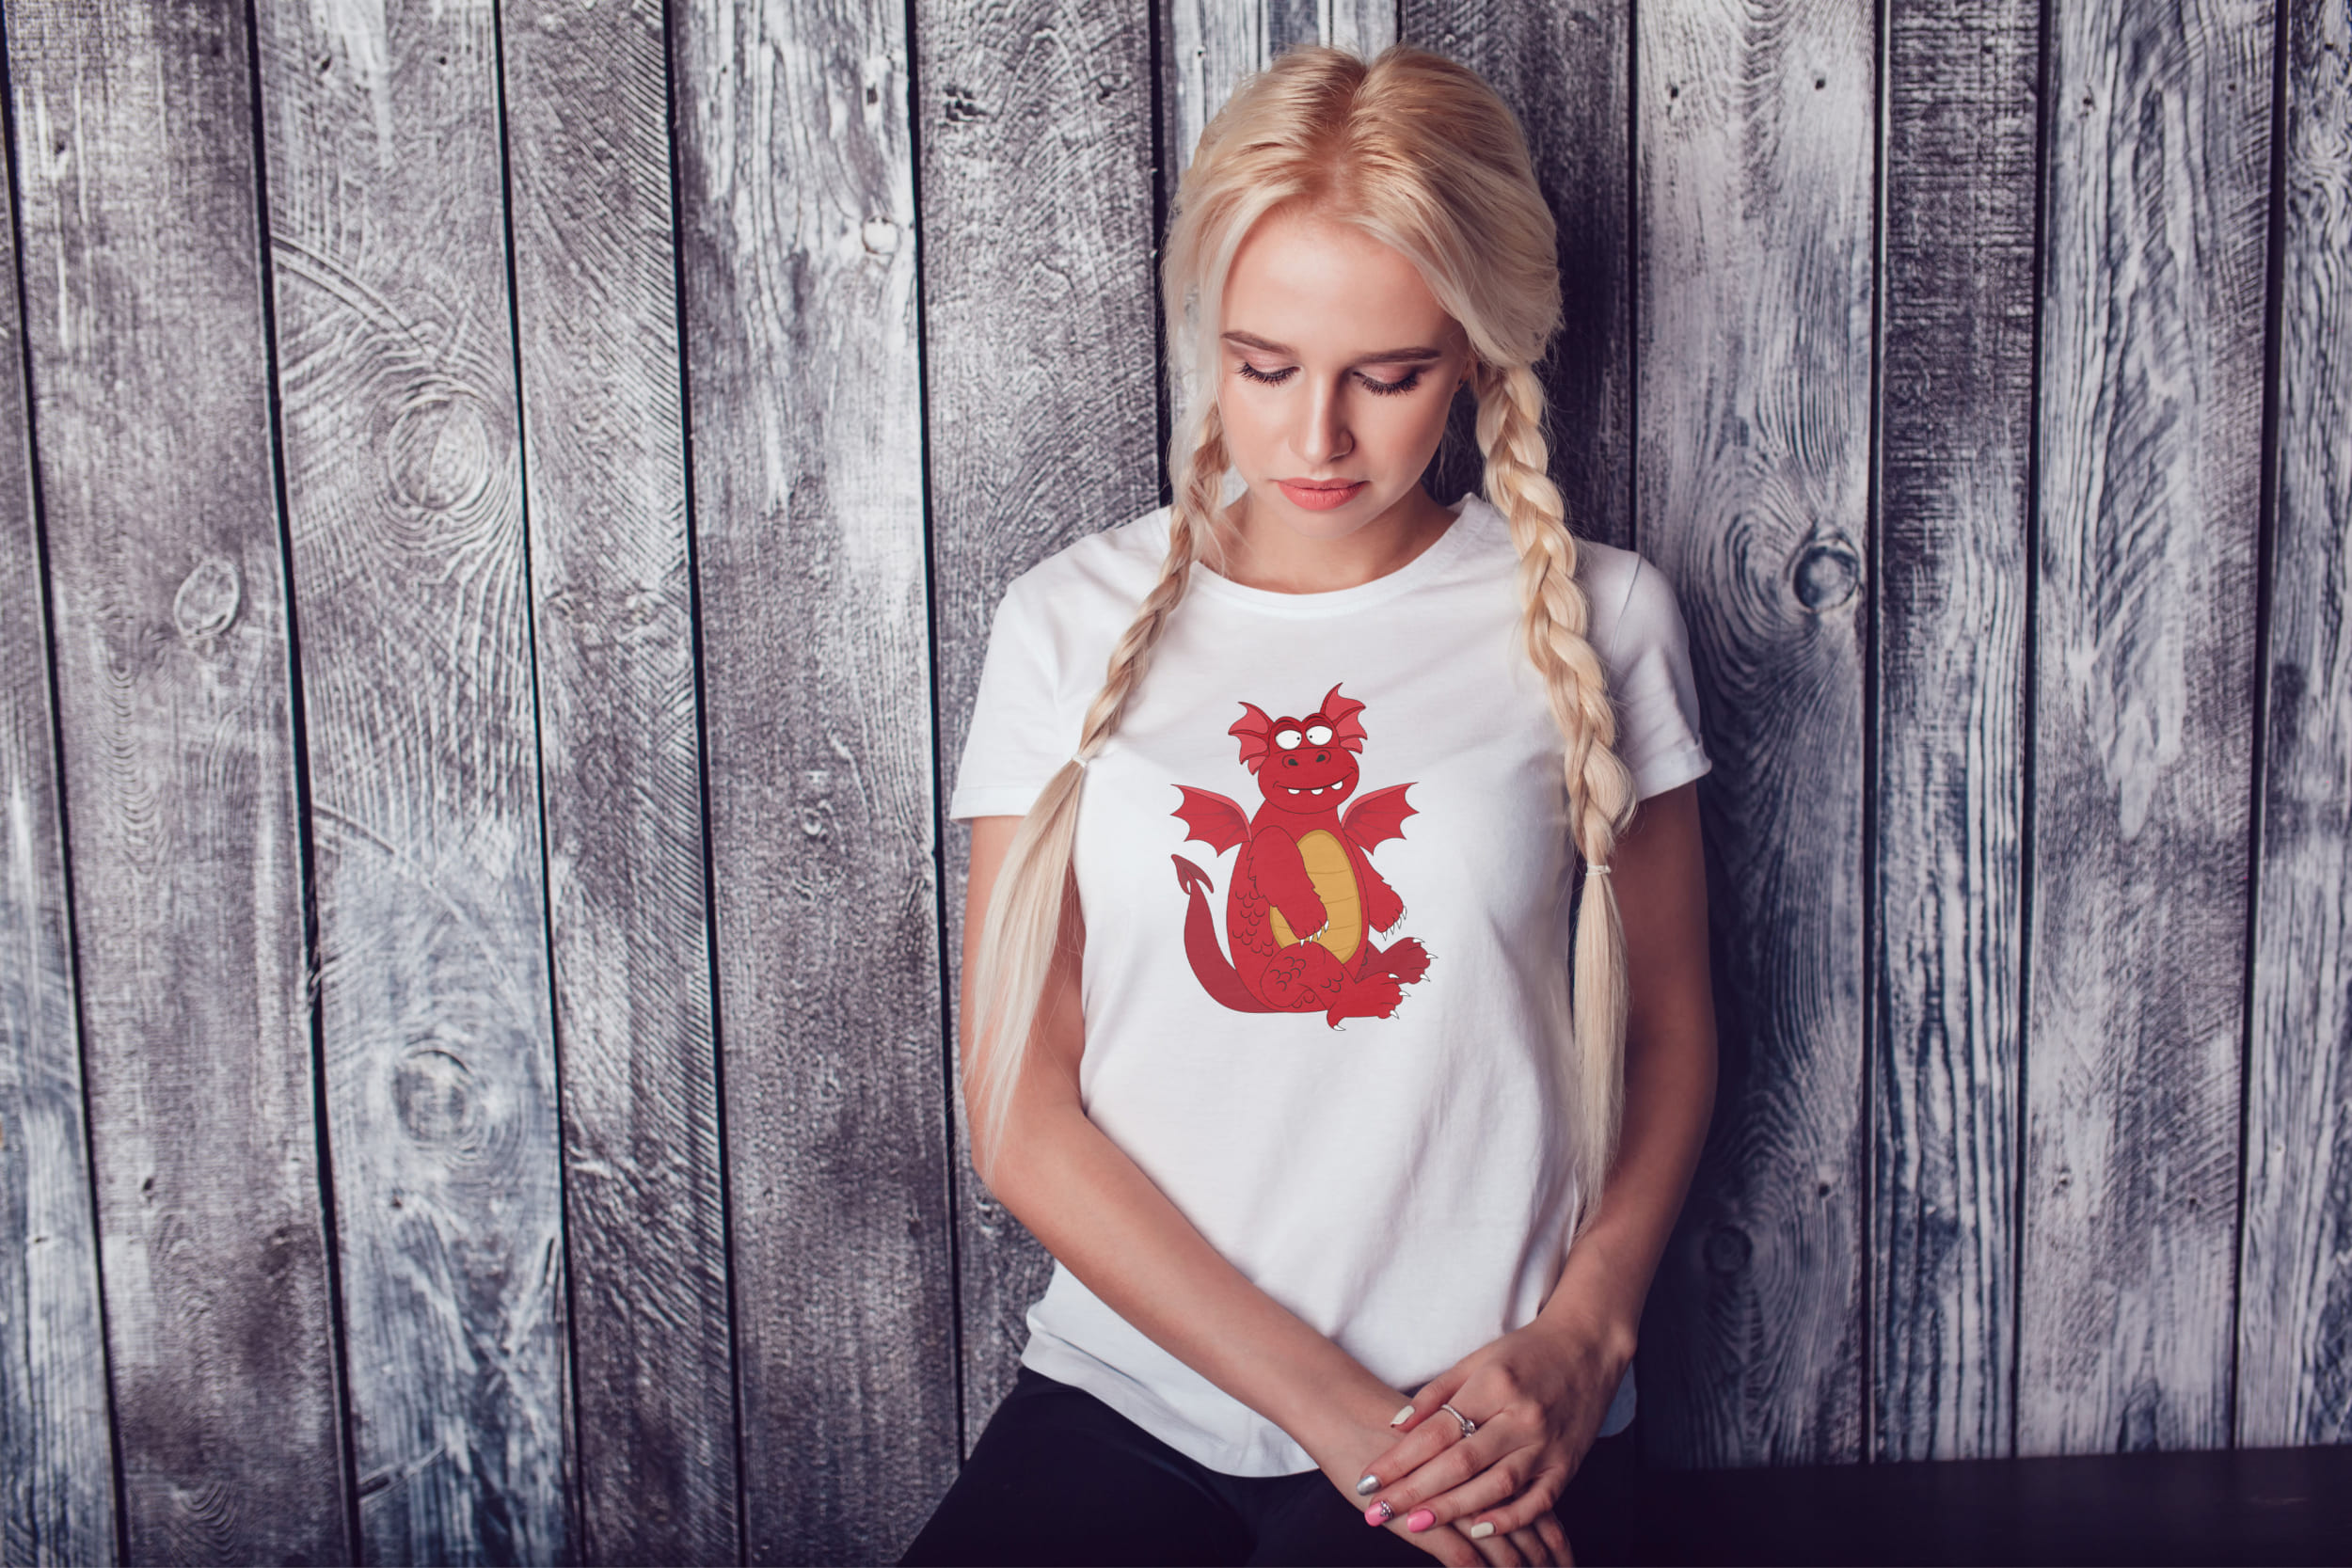 A girl with blond hair and a white T-shirt with a red and orange dragon.